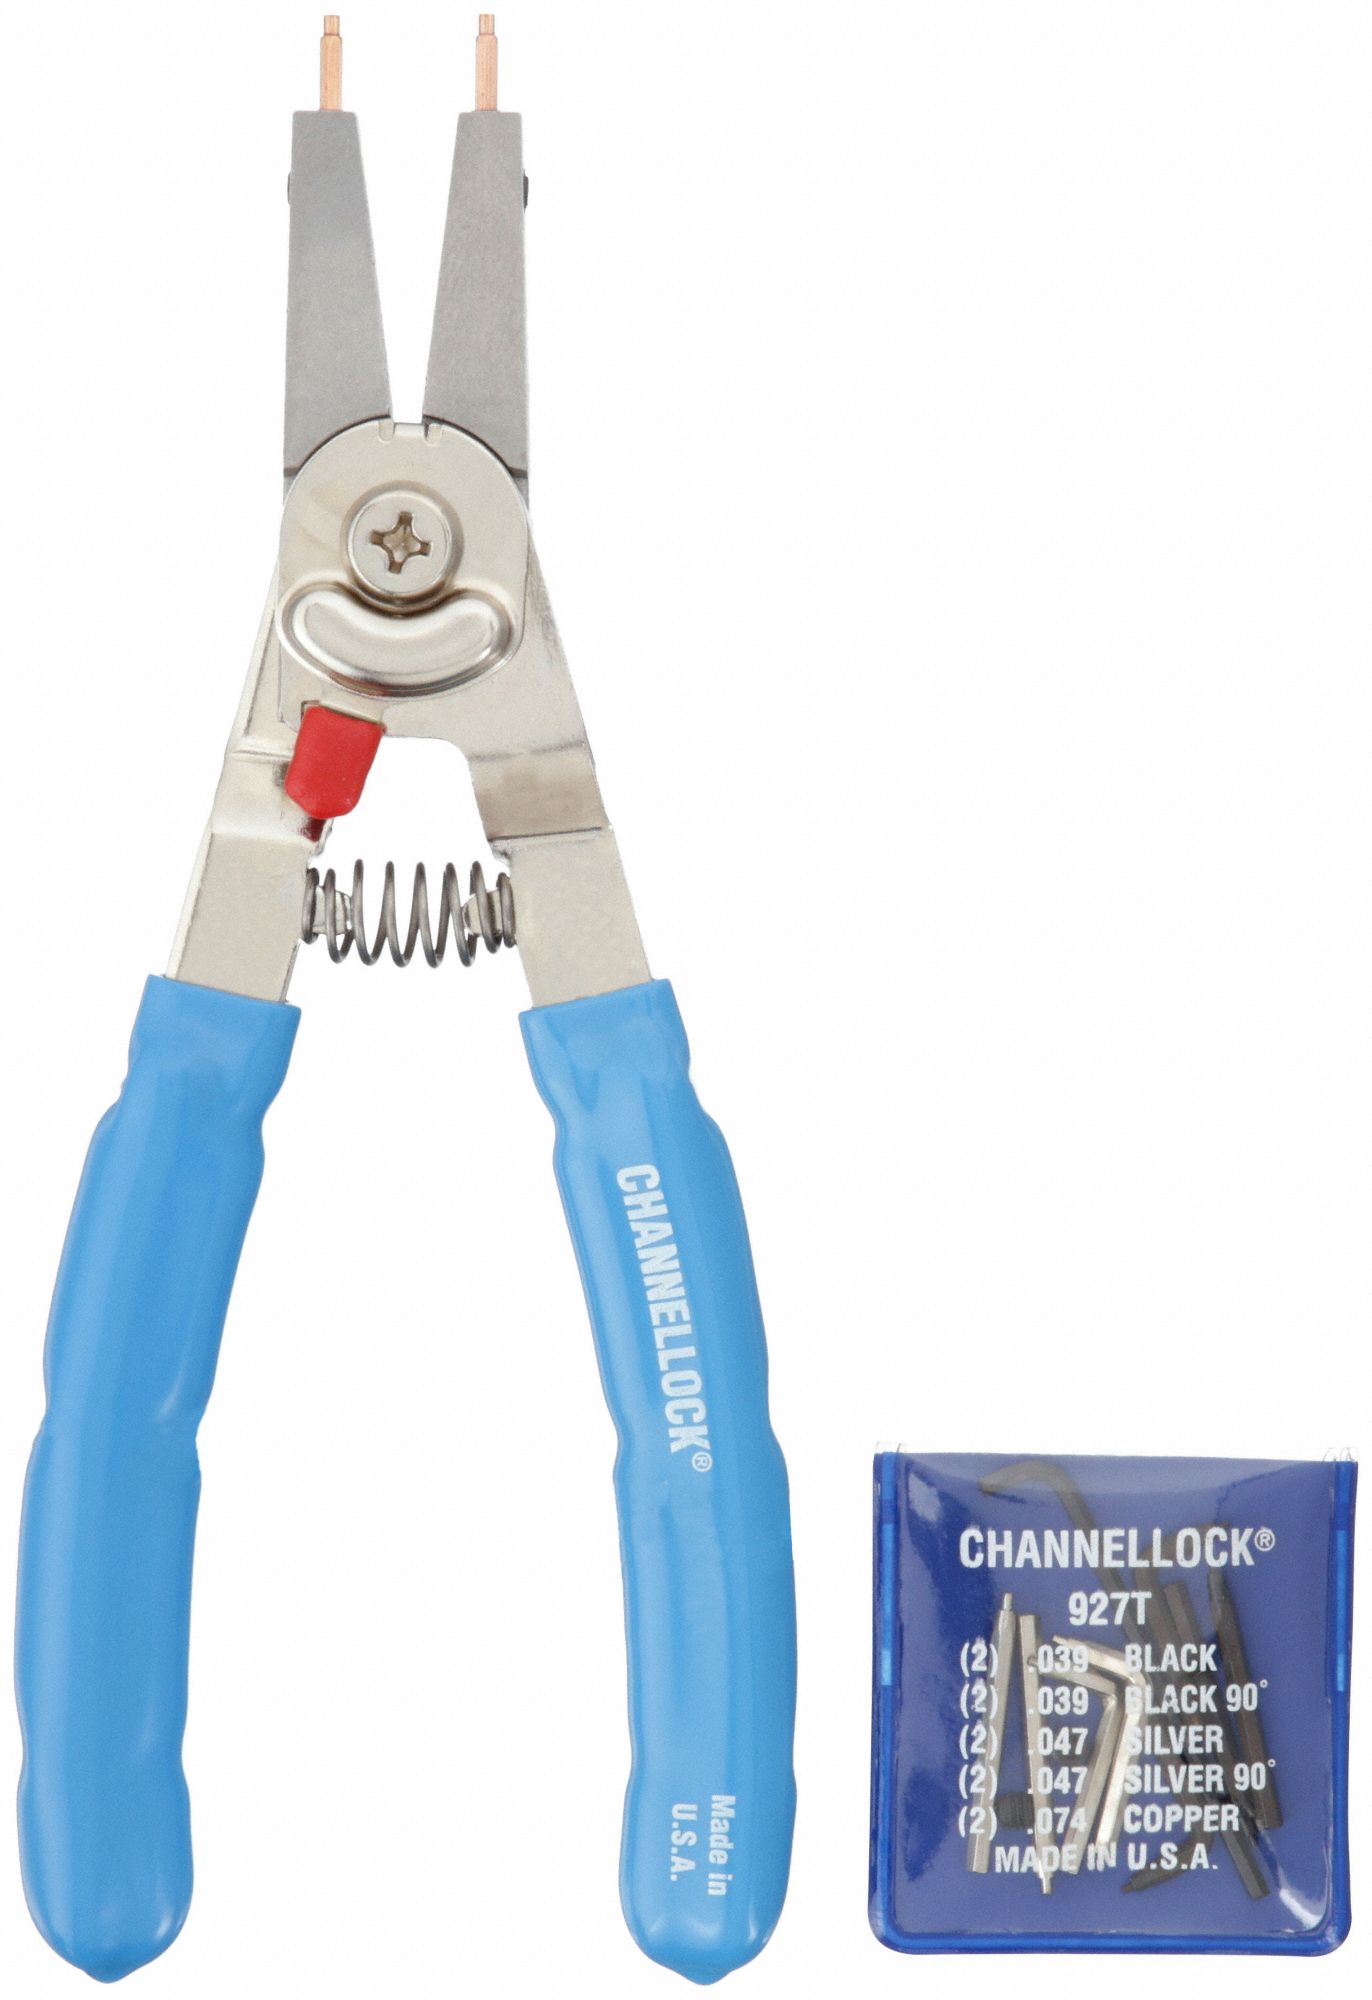 CHANNELLOCK SNAP RING PLIER - Retaining and Lock Ring Pliers